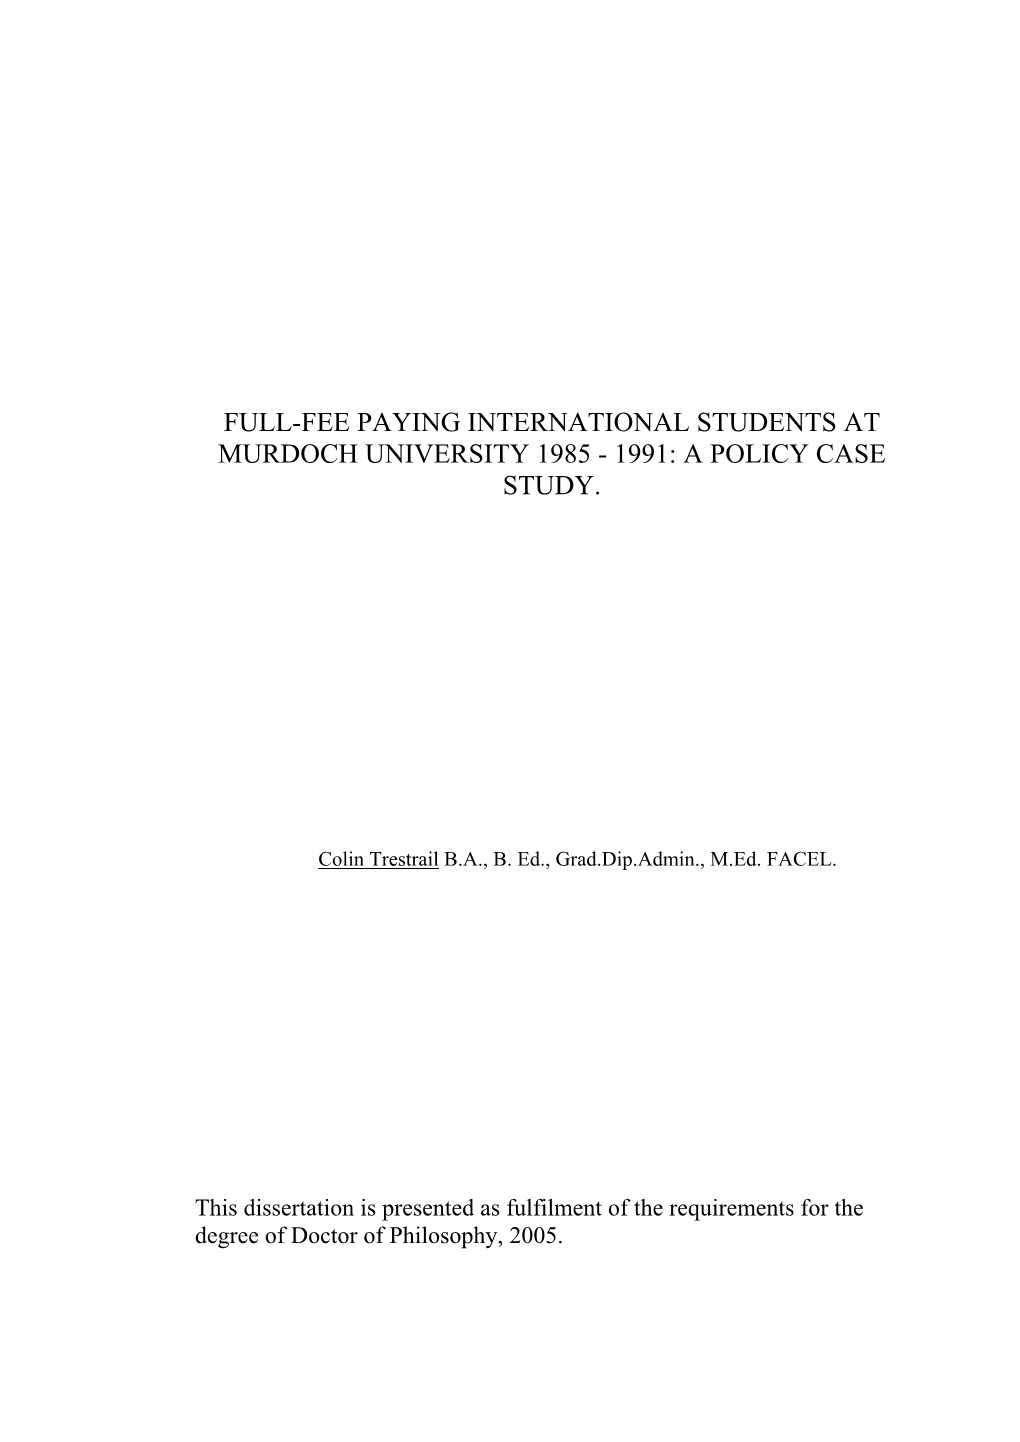 Full-Fee Paying International Students at Murdoch University 1985 - 1991: a Policy Case Study